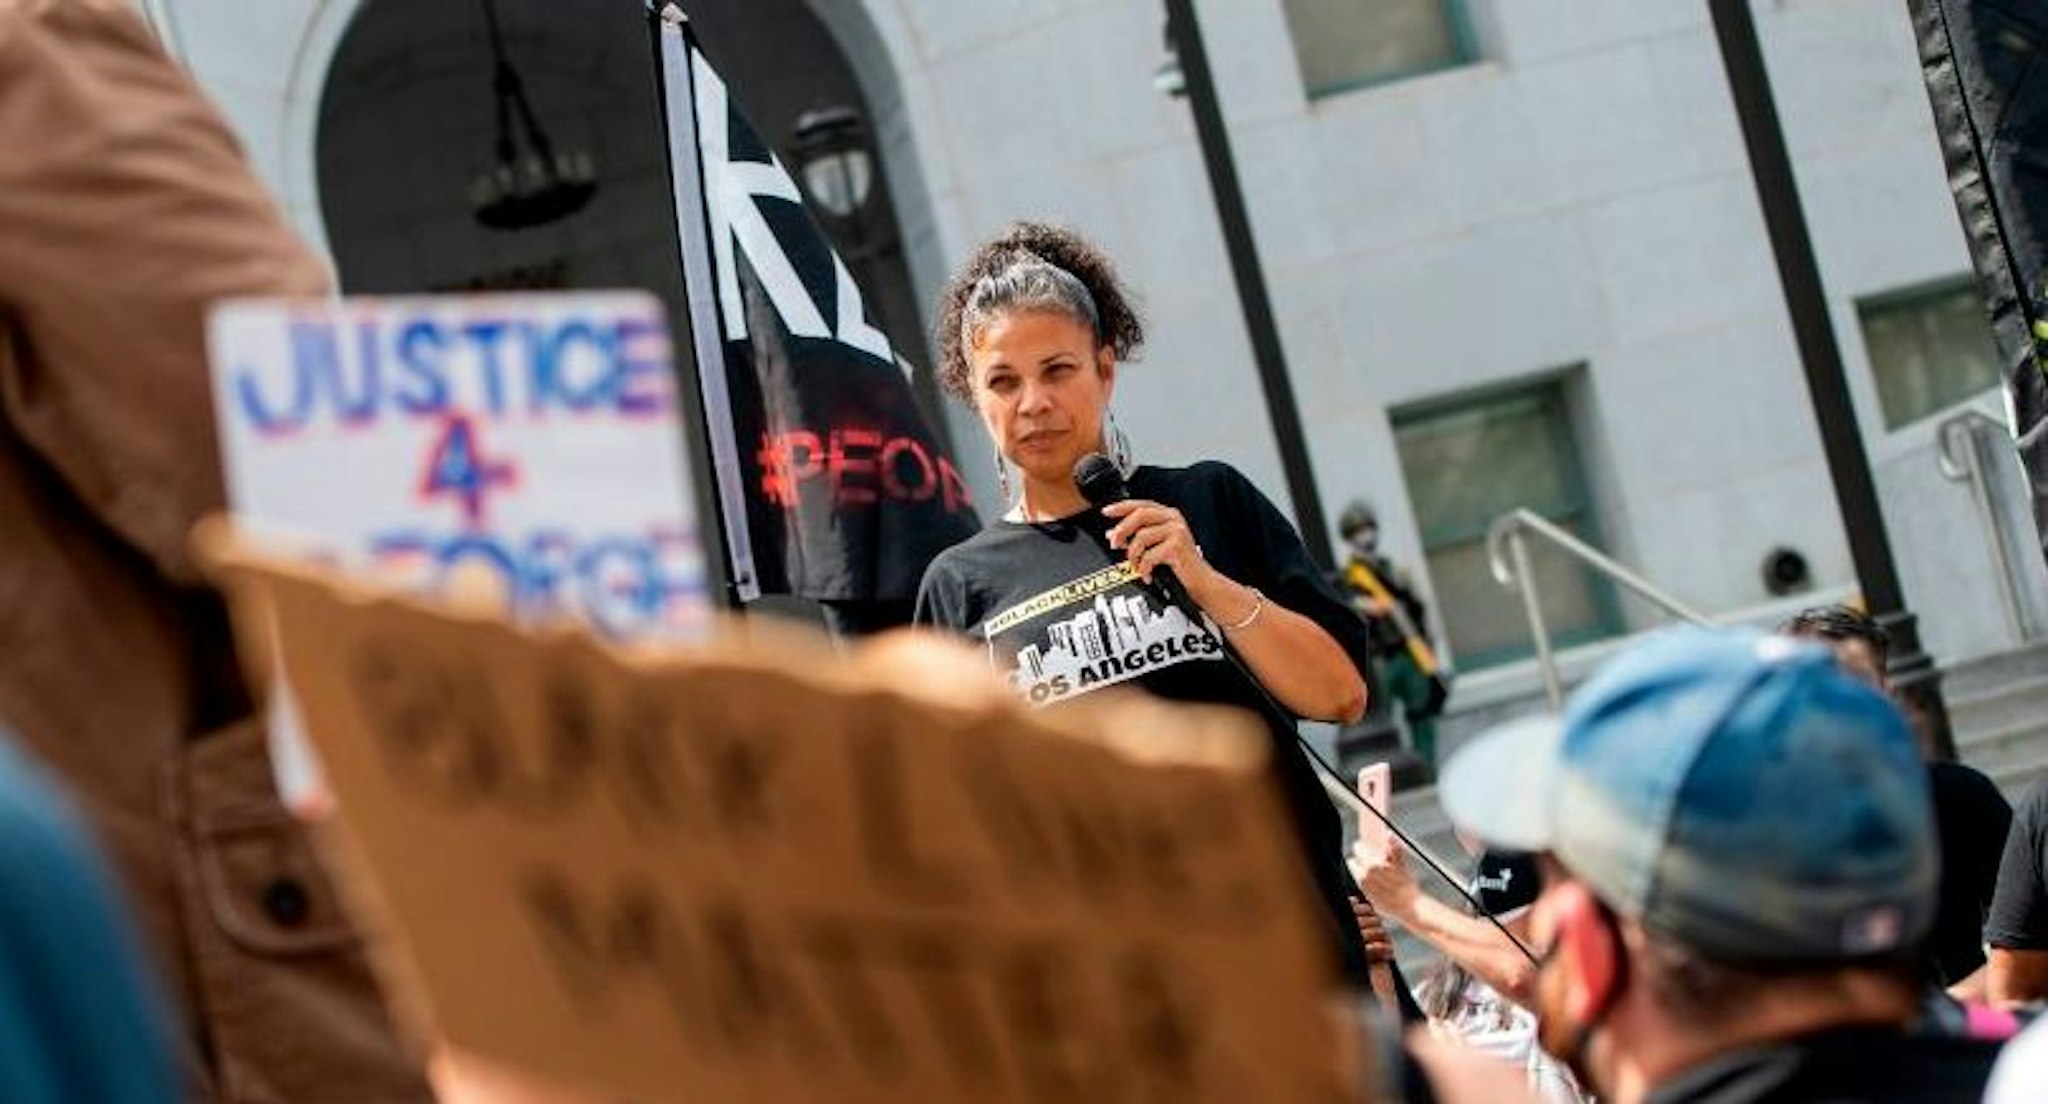 Melina Abdullah from Black Lives Matter addresses the crowd during a demonstration to ask for the removal of District Attorney Jackie Lacey in front of the Hall of Justice, in Los Angeles, California, on June 17, 2020. (Photo by VALERIE MACON / AFP) (Photo by VALERIE MACON/AFP via Getty Images)